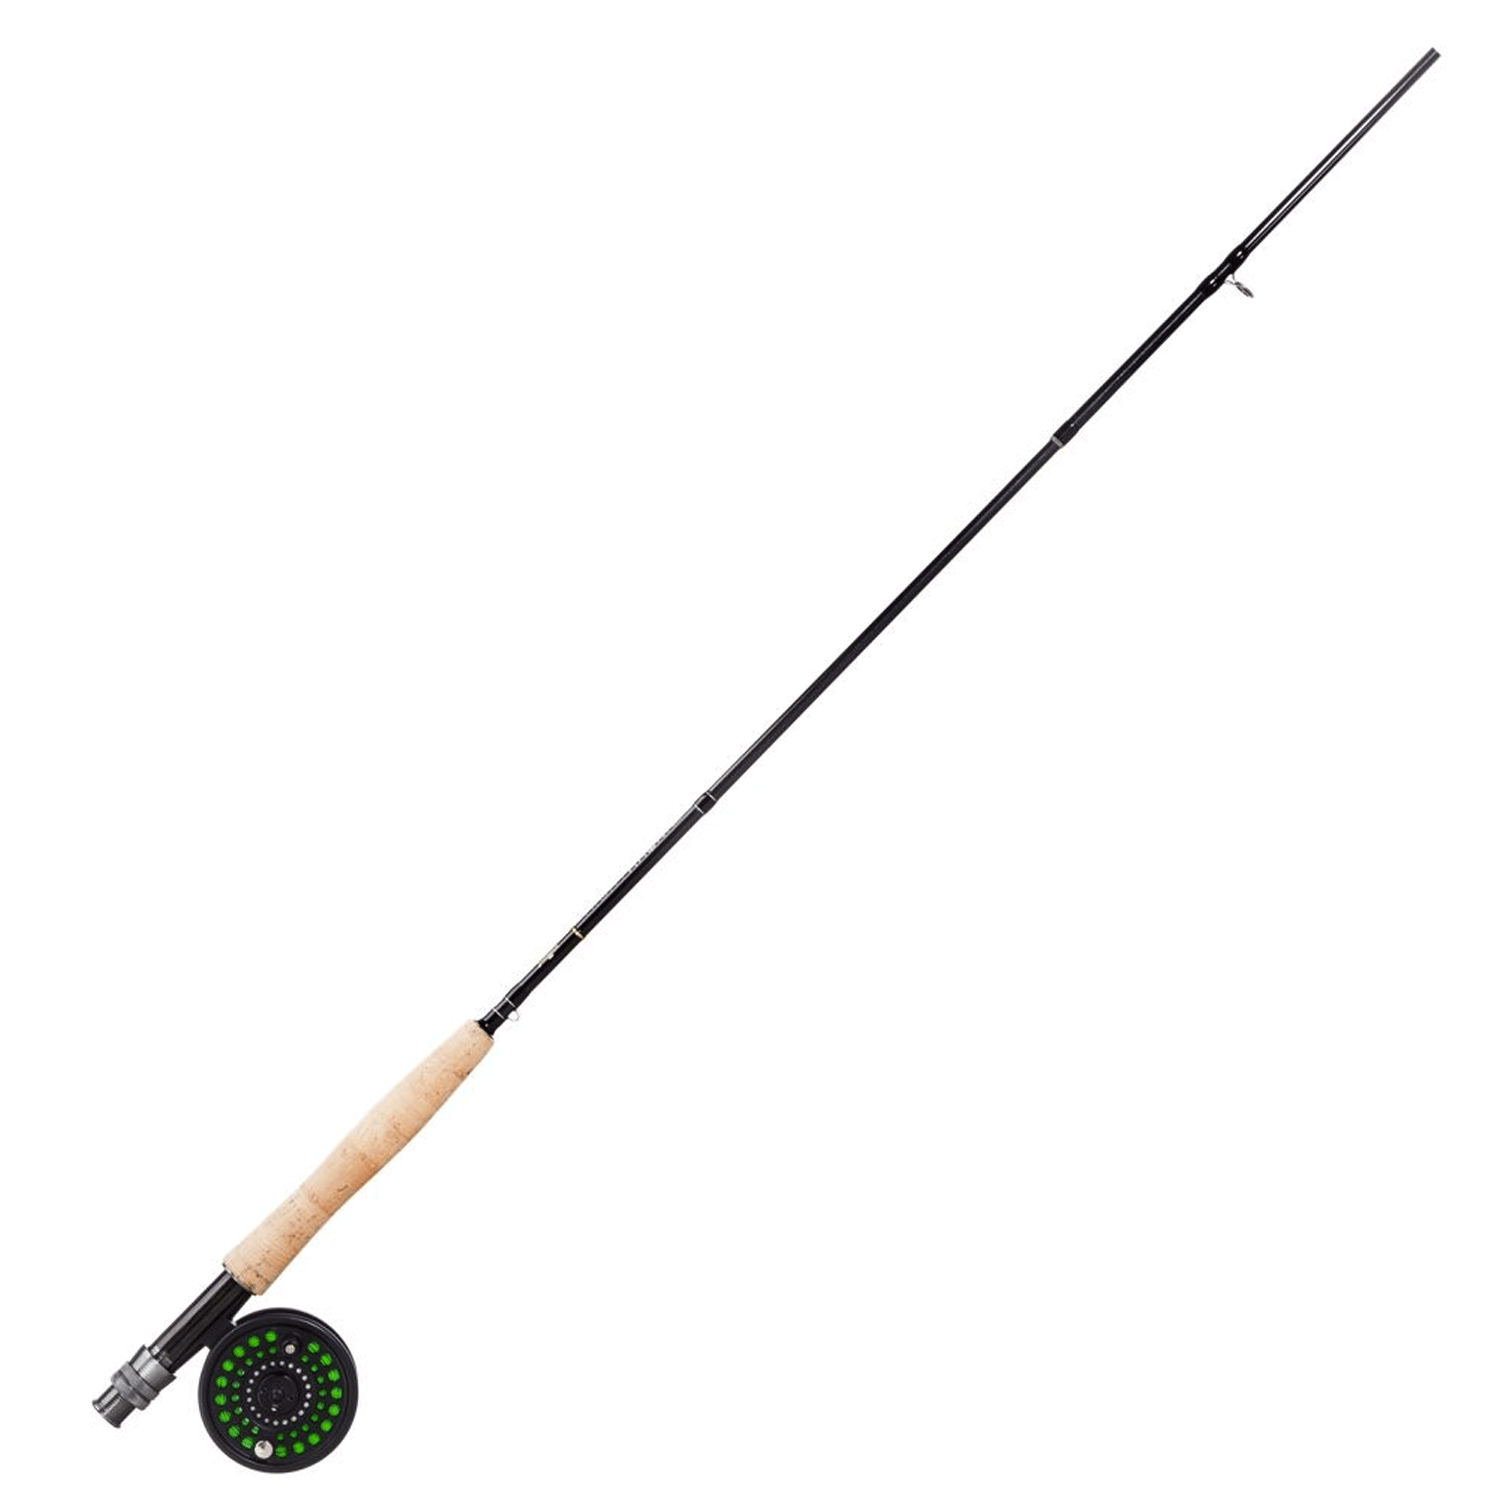 Fenwick Fly Rod #395 With Bronson Reel With Hard Case